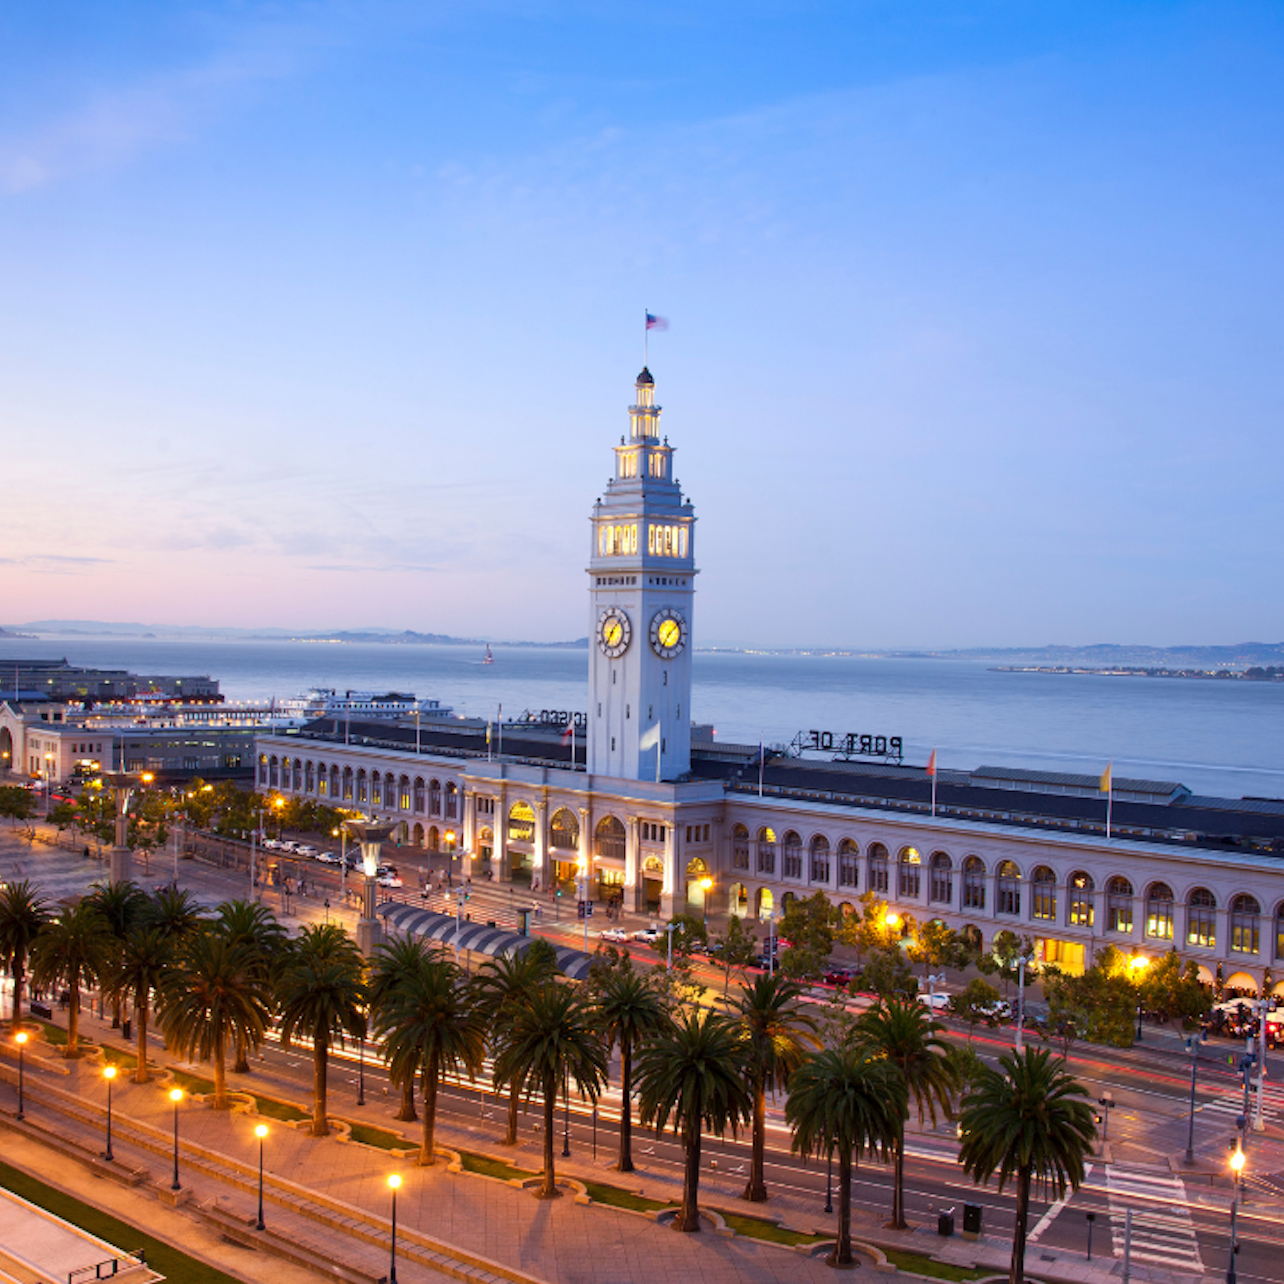 Gold Rush to Golden Gate: Self-Guided Tour of San Francisco - Accommodations in San Francisco